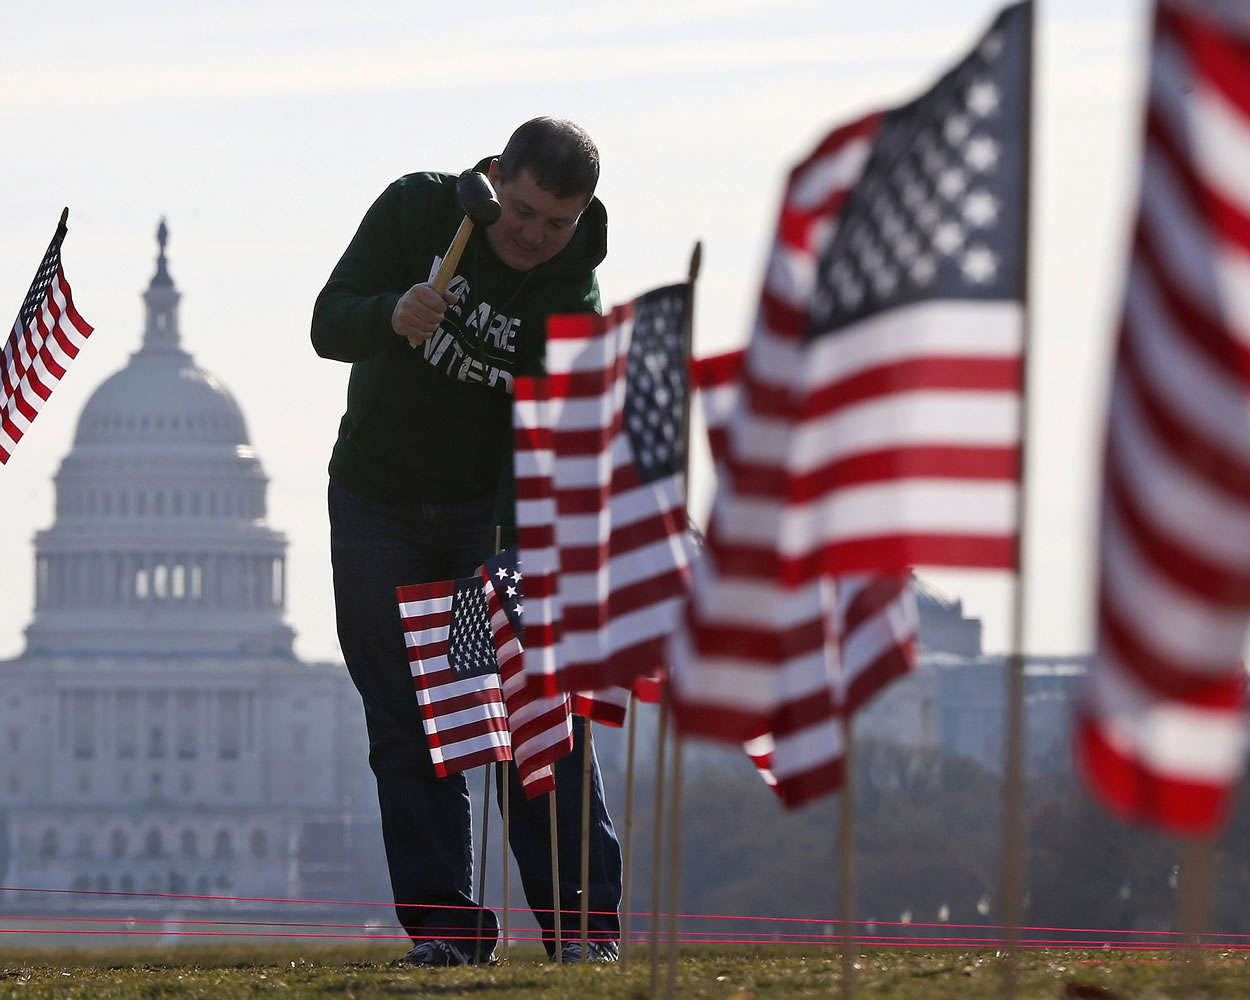 With the Capitol in the background, Army veteran David Dickerson of Oklahoma City, Okla., joins others to place 1,892 flags representing veteran and service members who have died by suicide to date in 2014, on the National Mall in Washington.